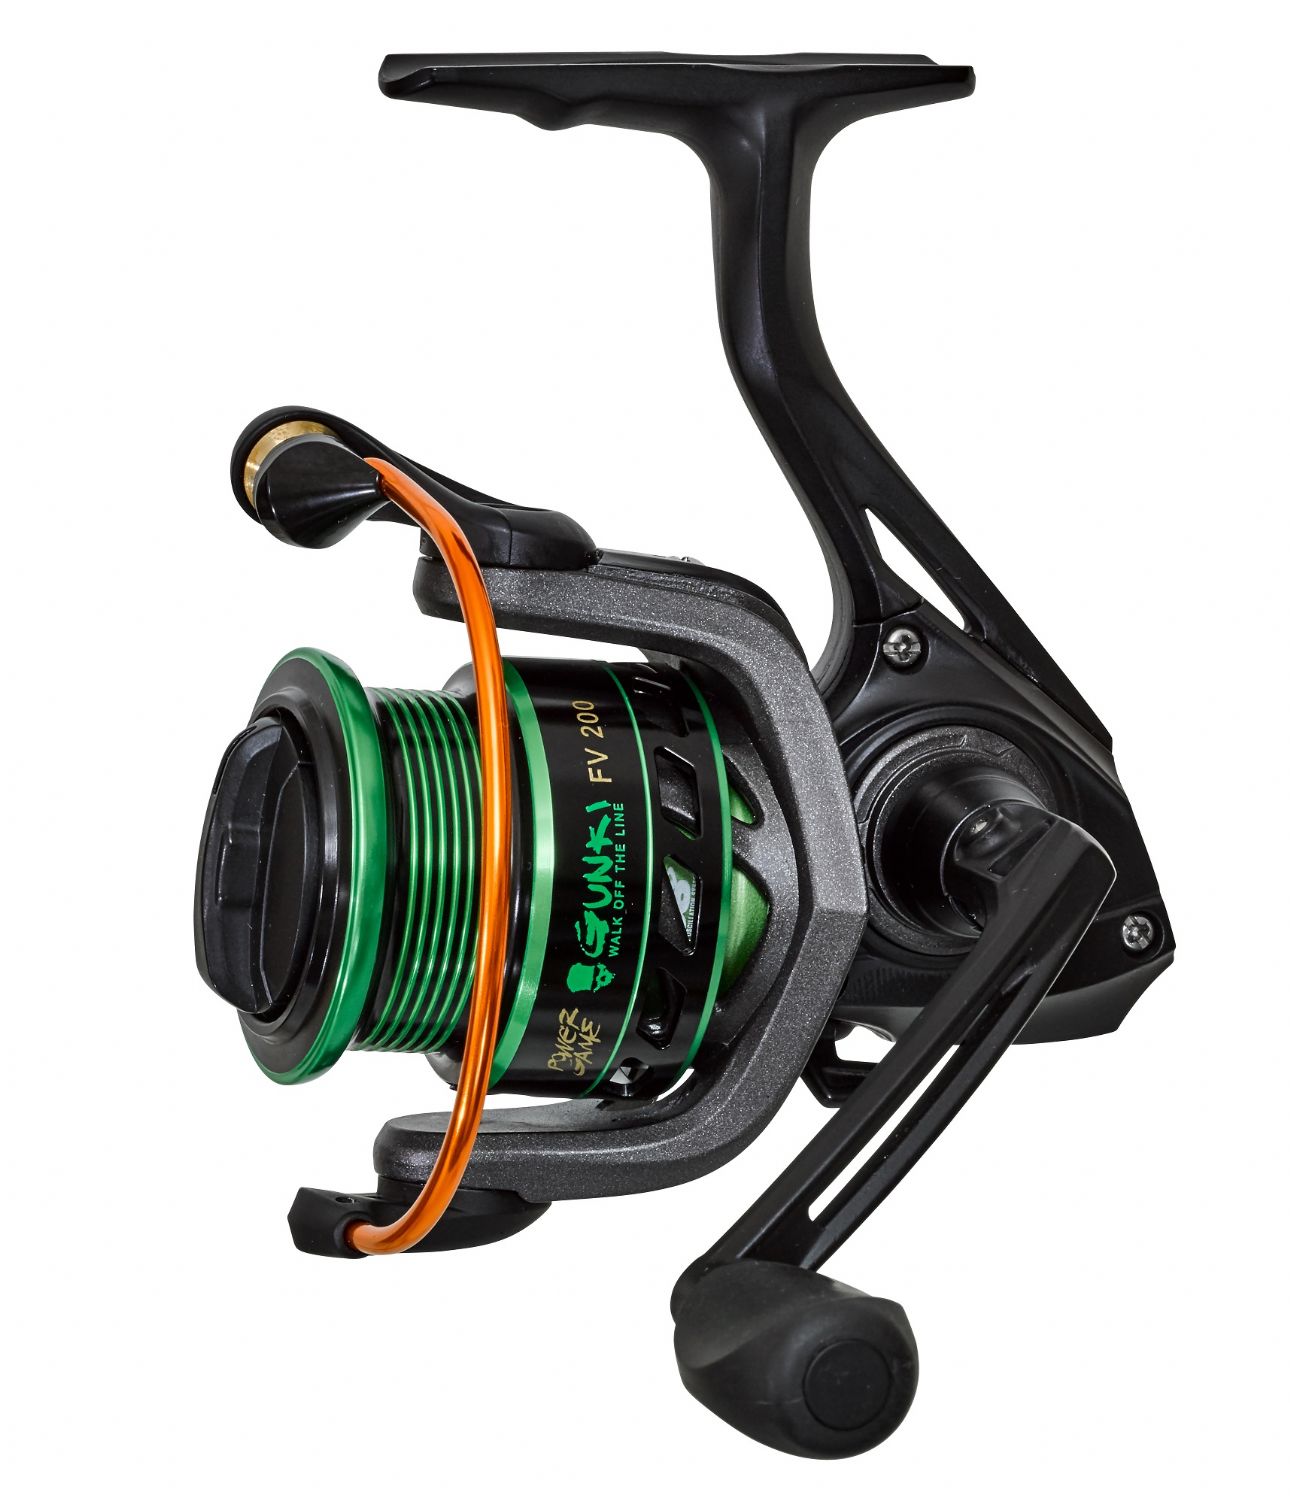 Savage Gear SG2 Spinning Reel - Angling Active